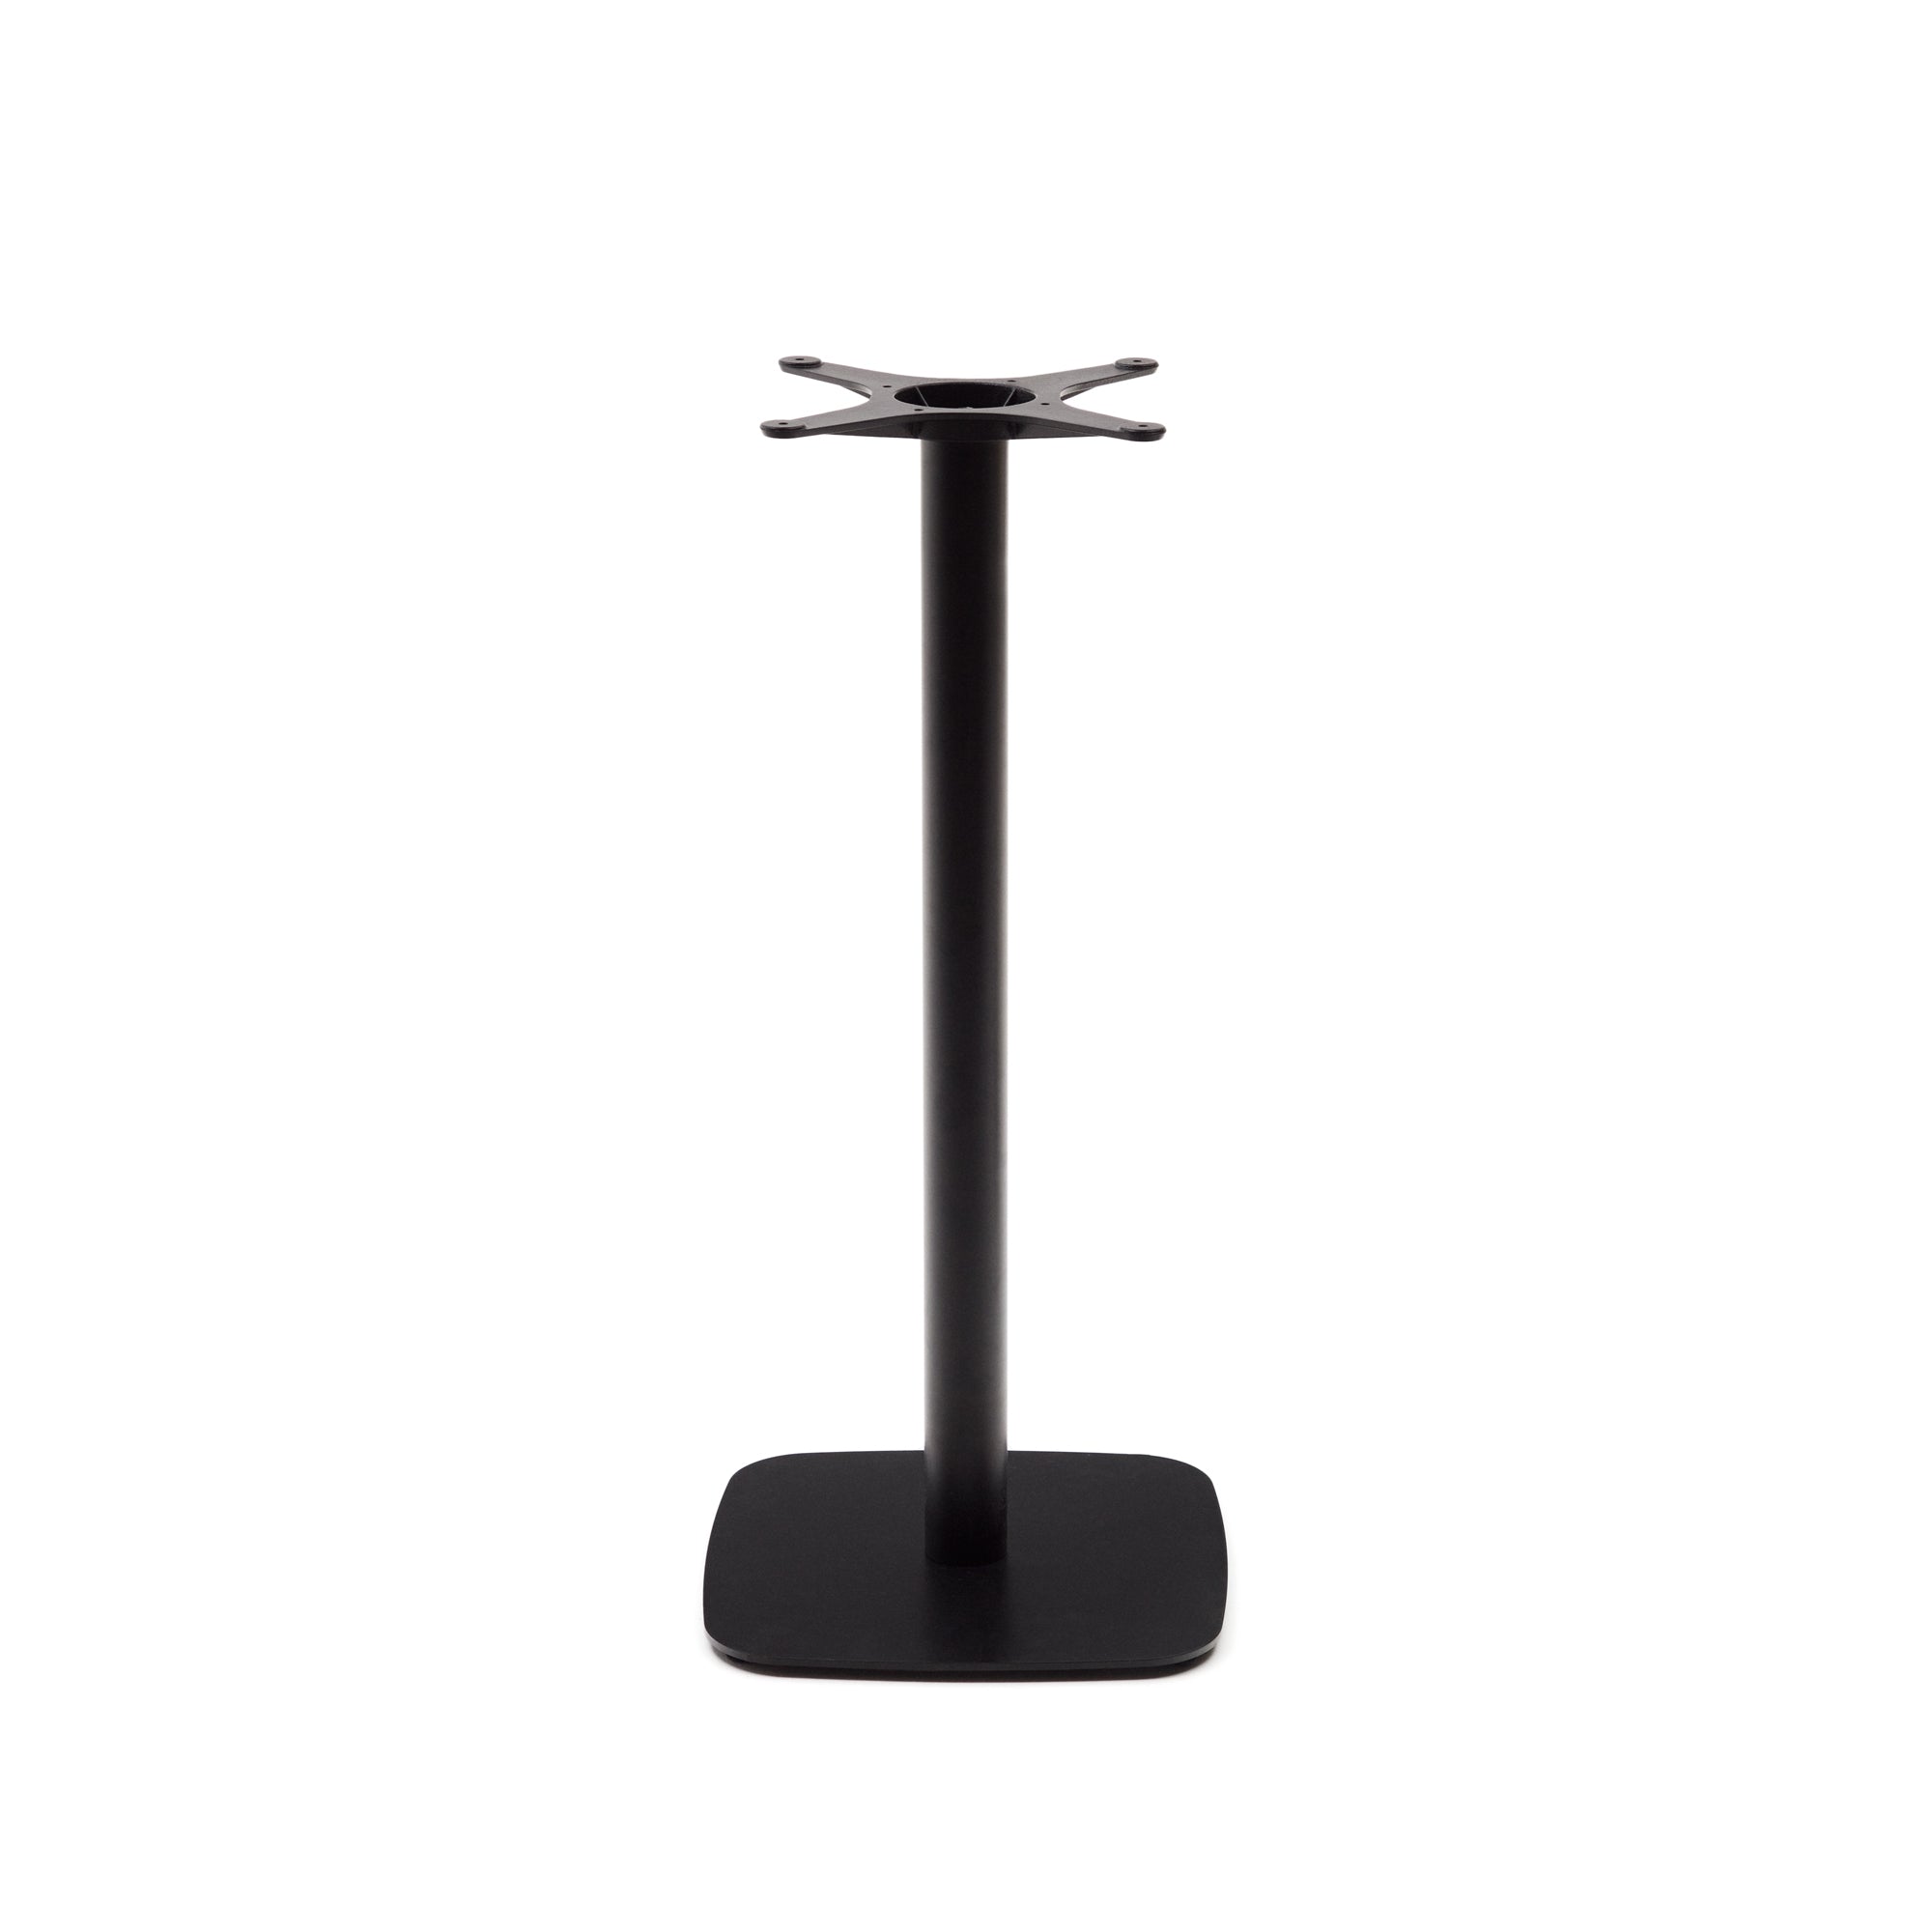 Dina high bar-table leg with square metal base in a painted black finish